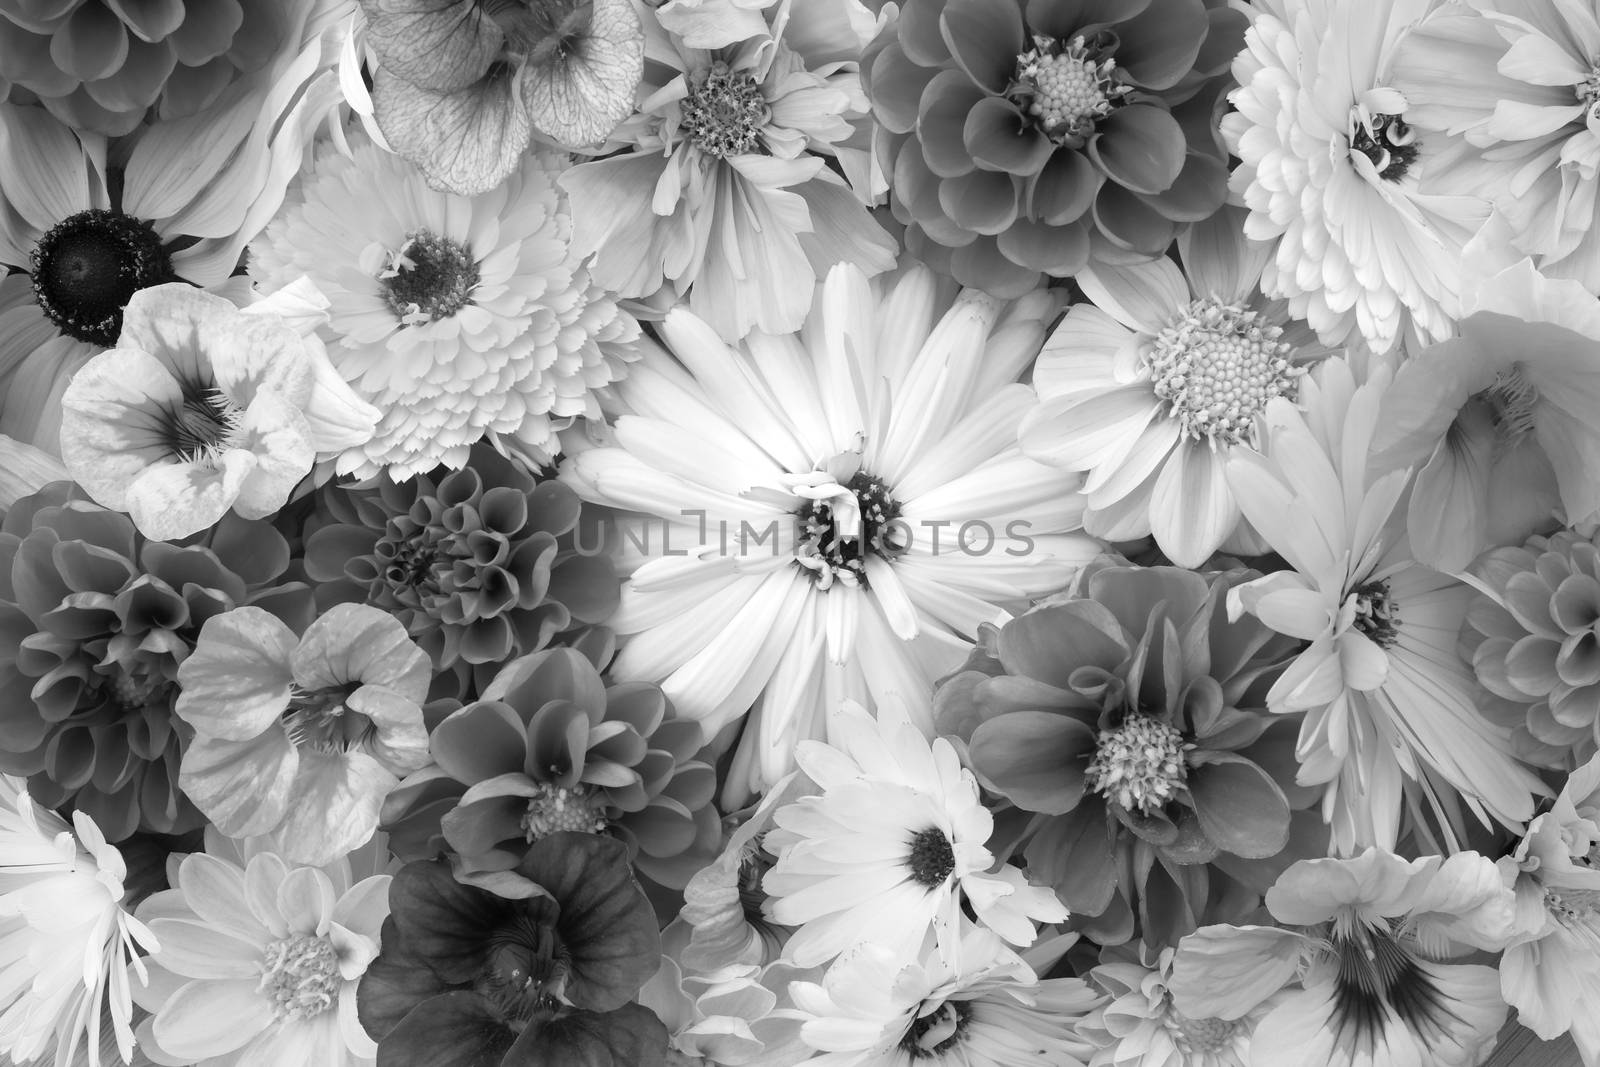 Large calendula flower among mixed blooms - nasturtiums, dahlias and cosmos - monochrome processing